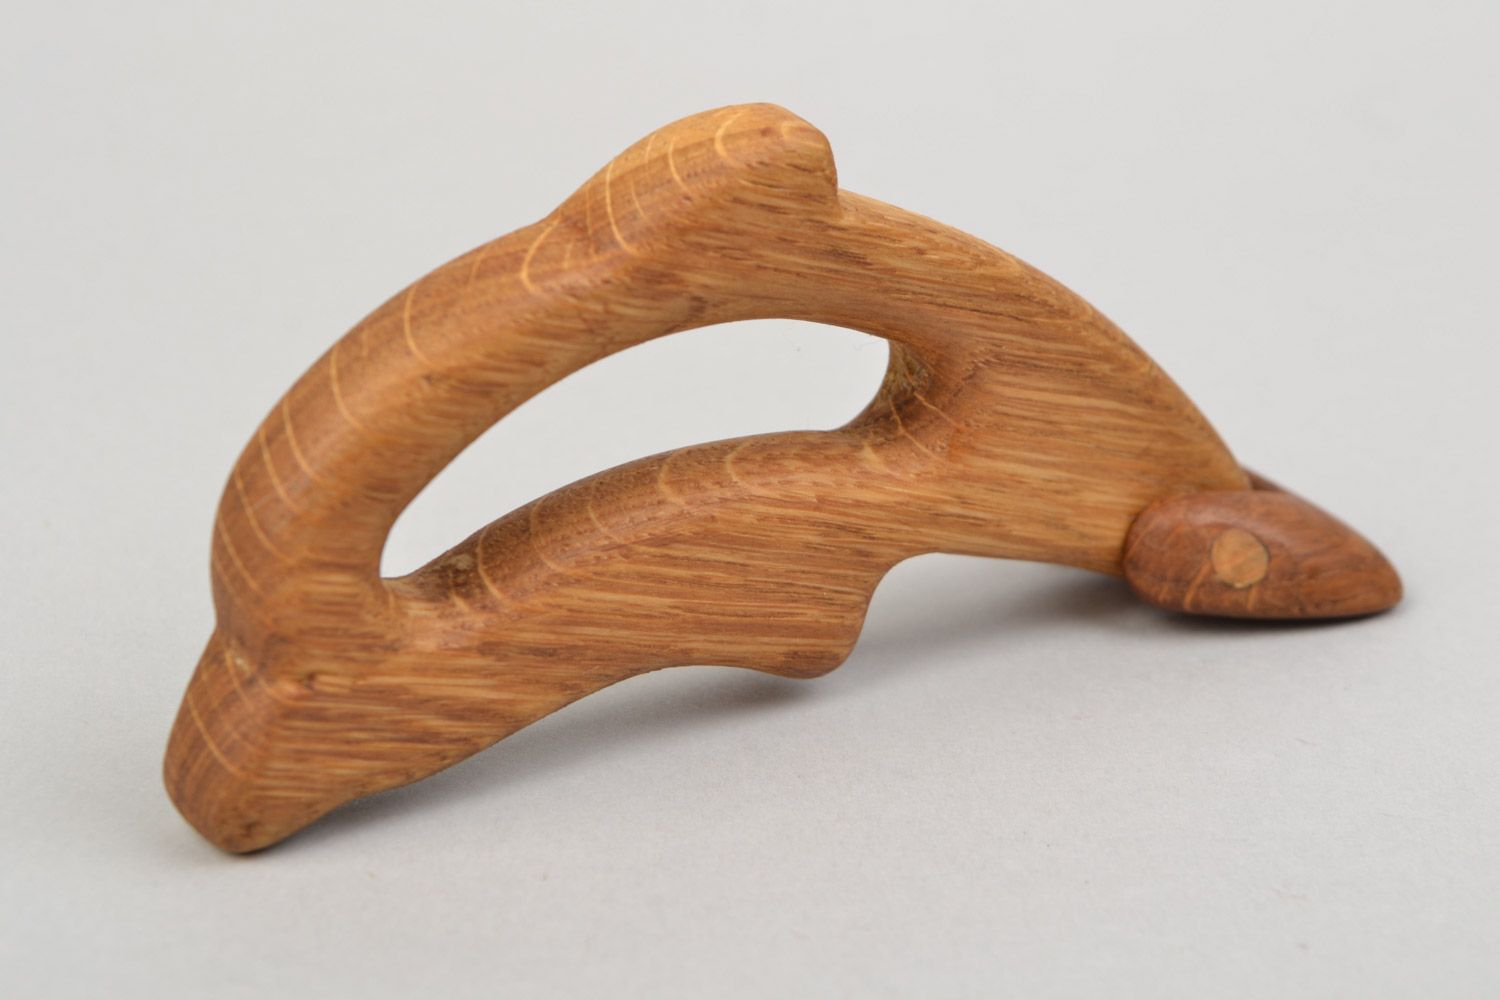 Handmade wooden teething toy in the shape of dolphin imbued with linseed oil photo 3